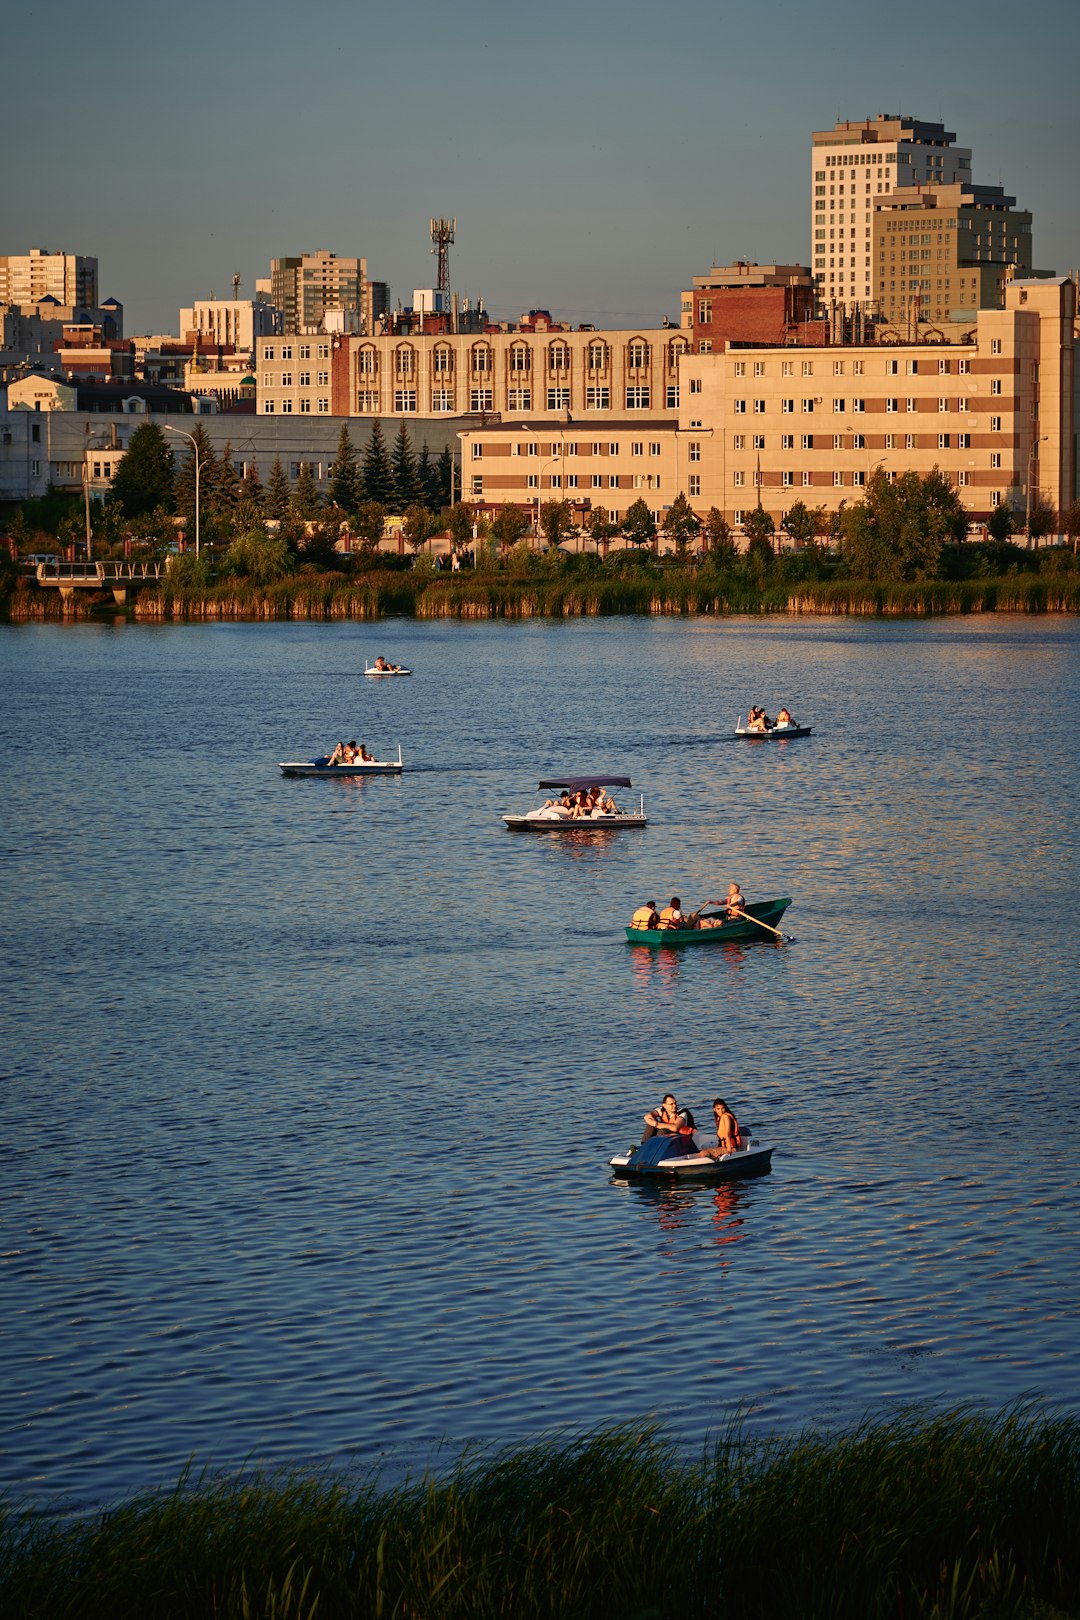 people riding on red boat on water near buildings during daytime